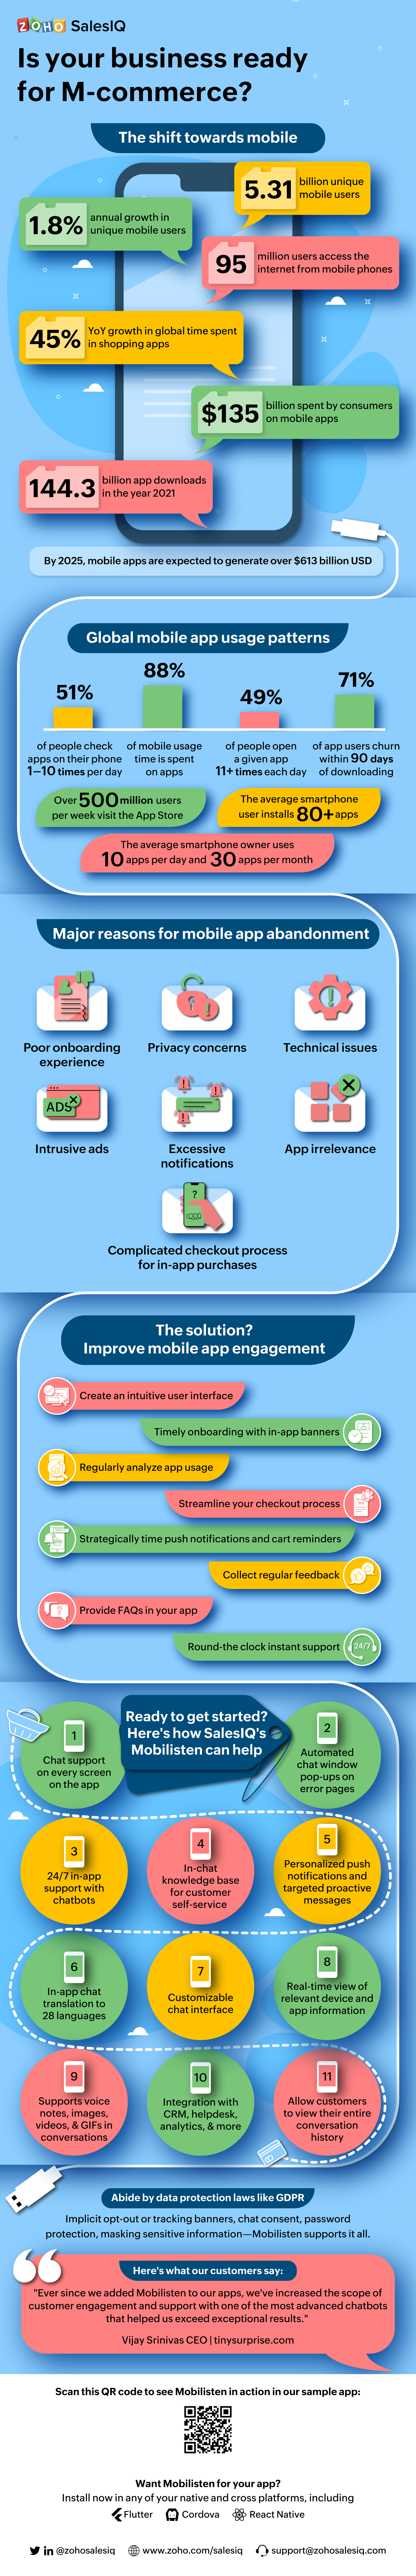 Boost mobile app engagement and prepare for the mcommerce age